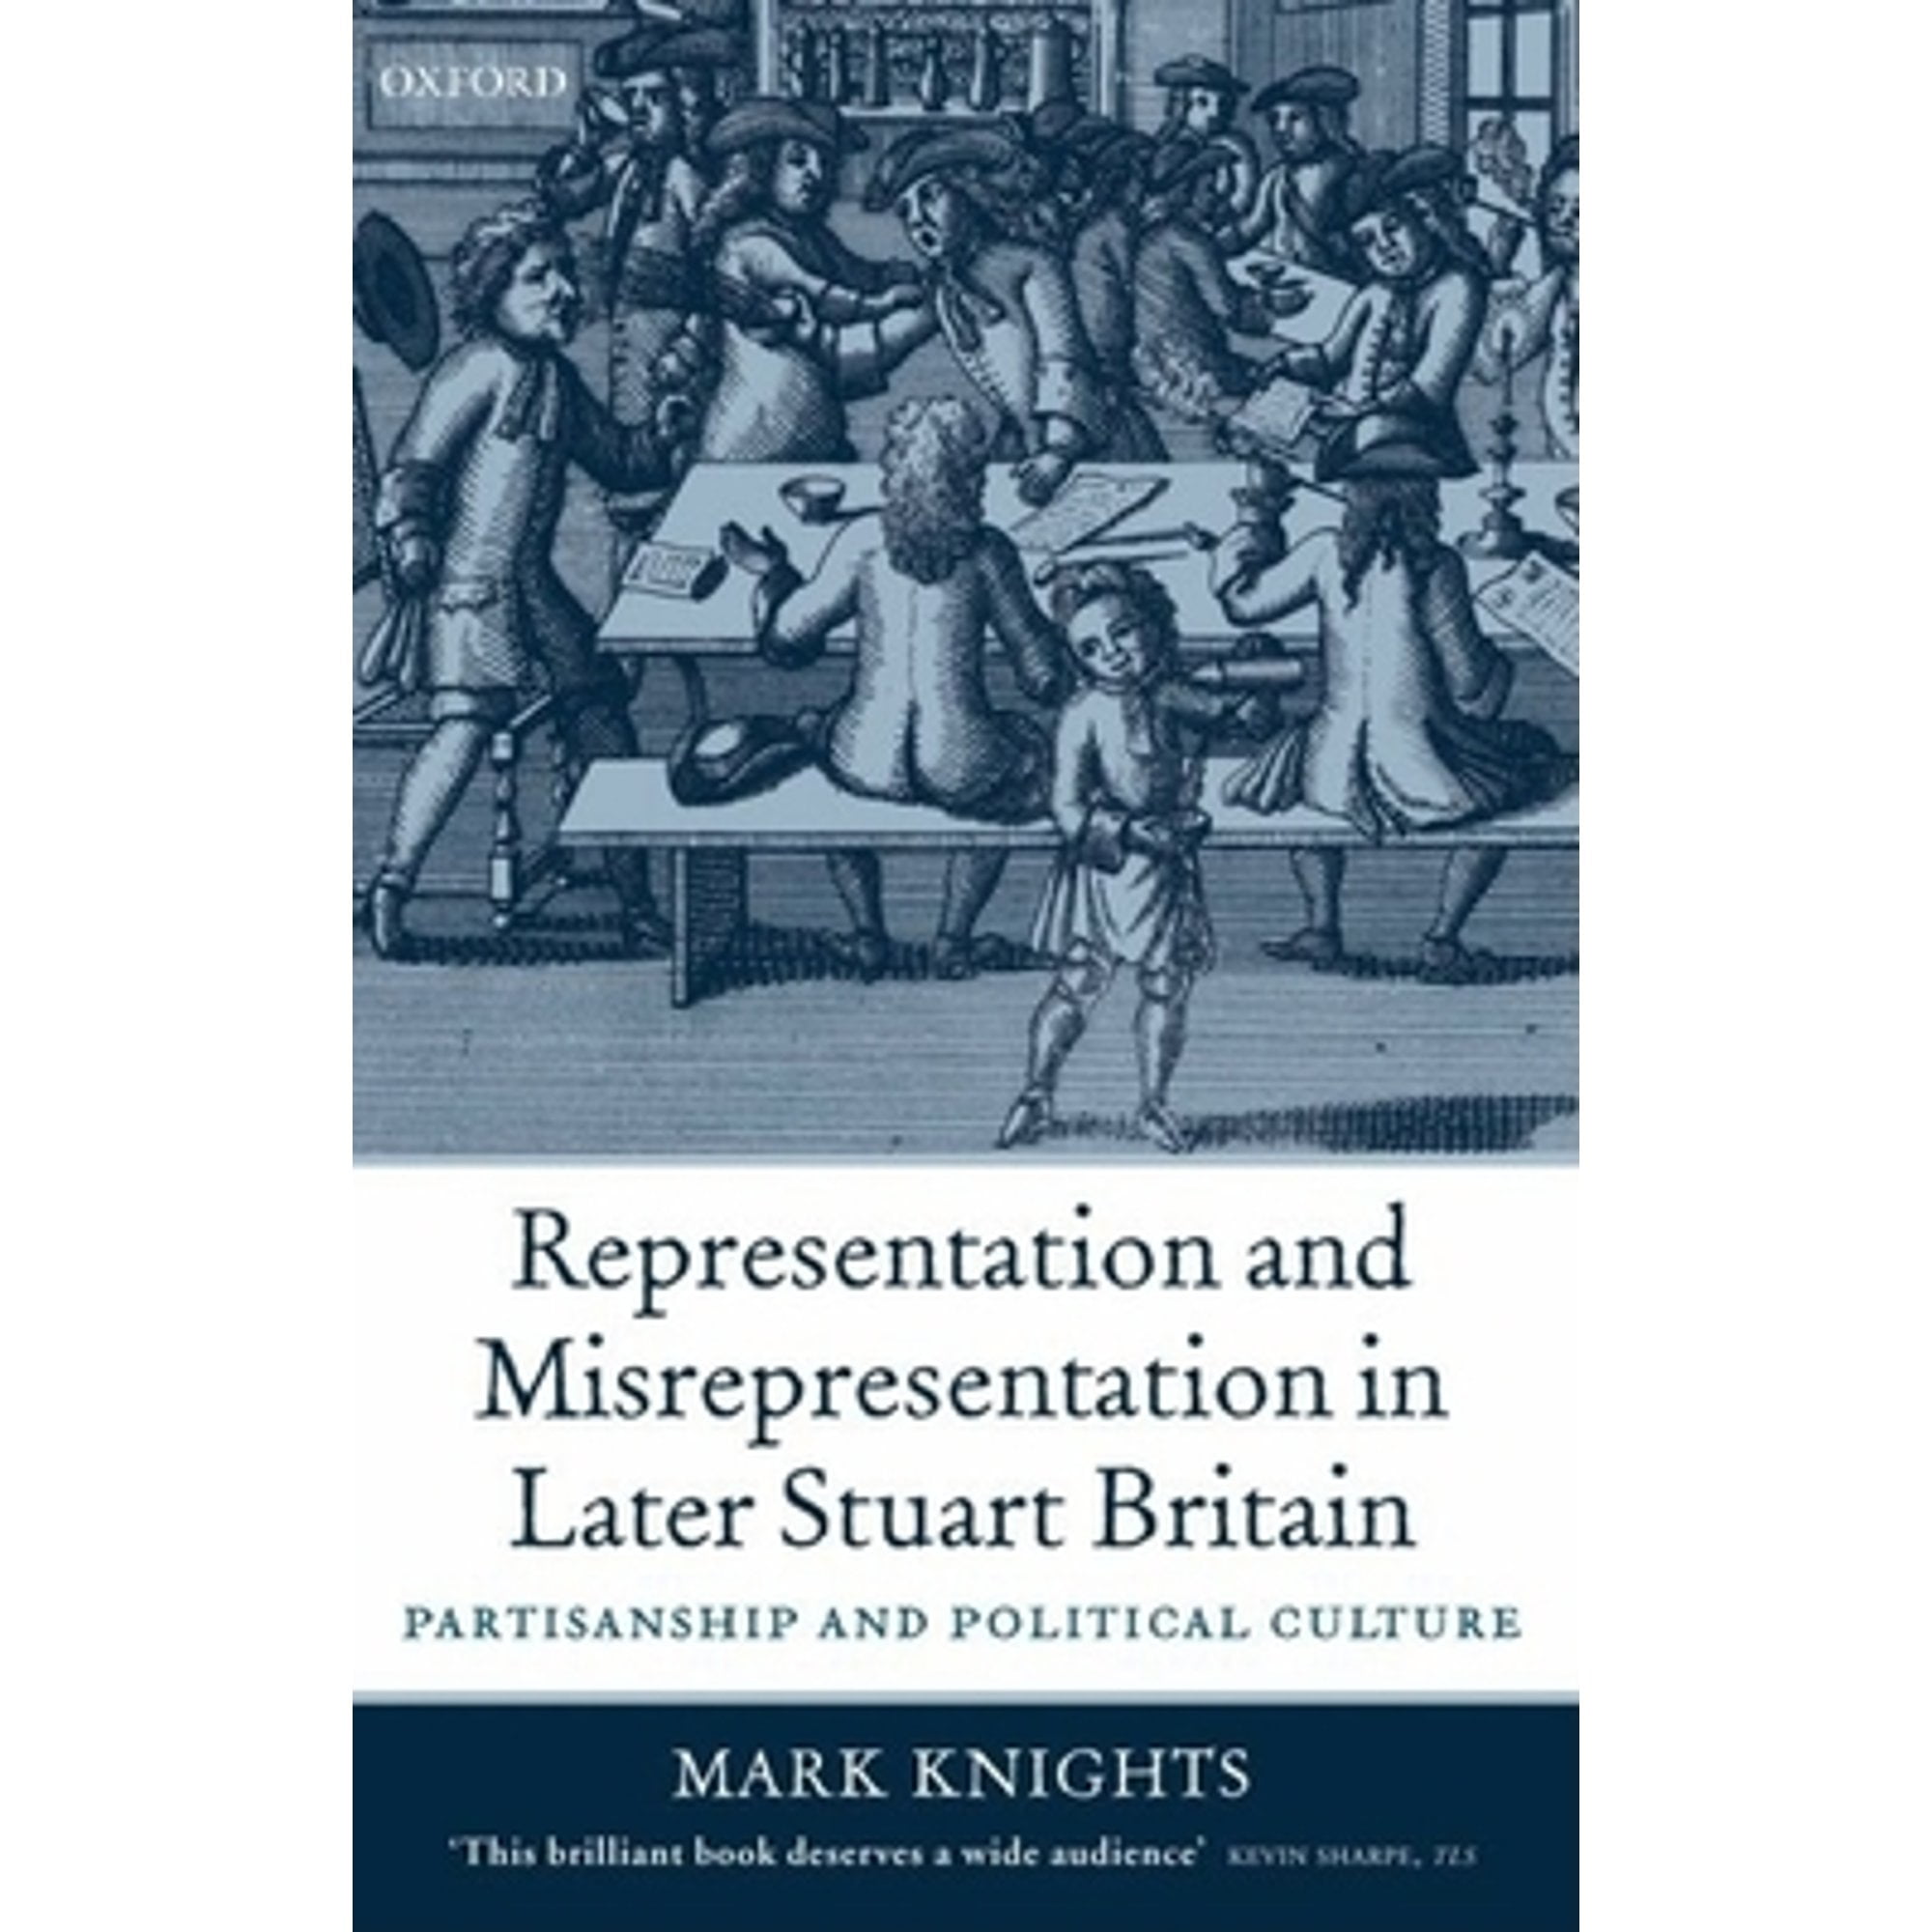 Pre-Owned Representation and Misrepresentation in Later Stuart Britain: Partisanship and Political (Paperback) by Mark Knights